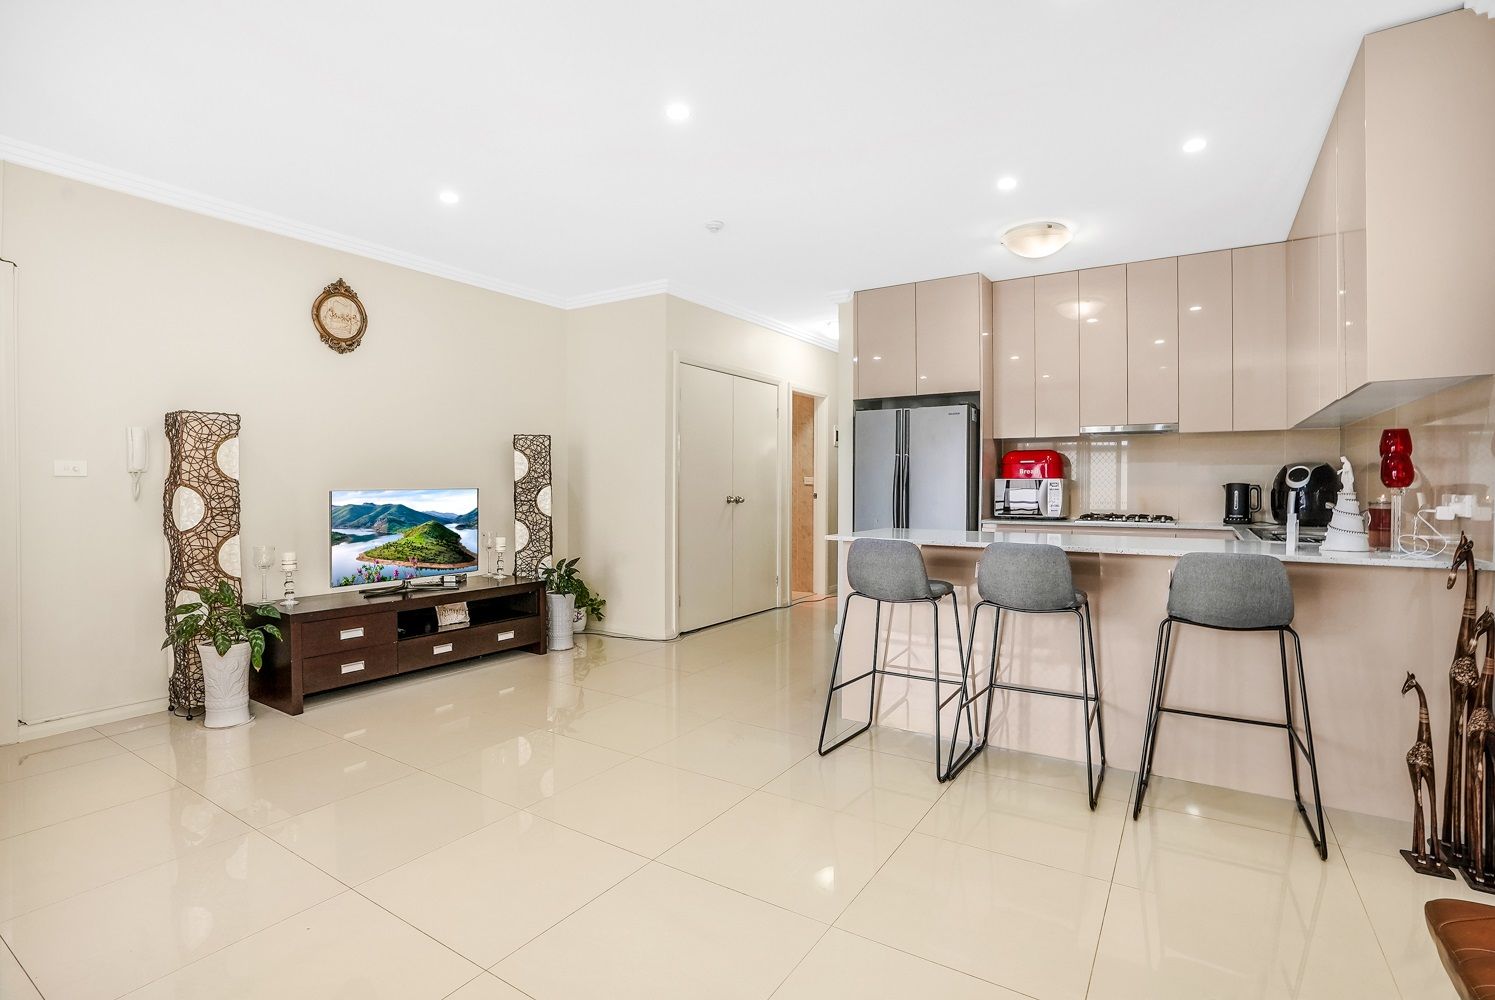 2 bedrooms Apartment / Unit / Flat in 10/133 Polding Street FAIRFIELD WEST NSW, 2165